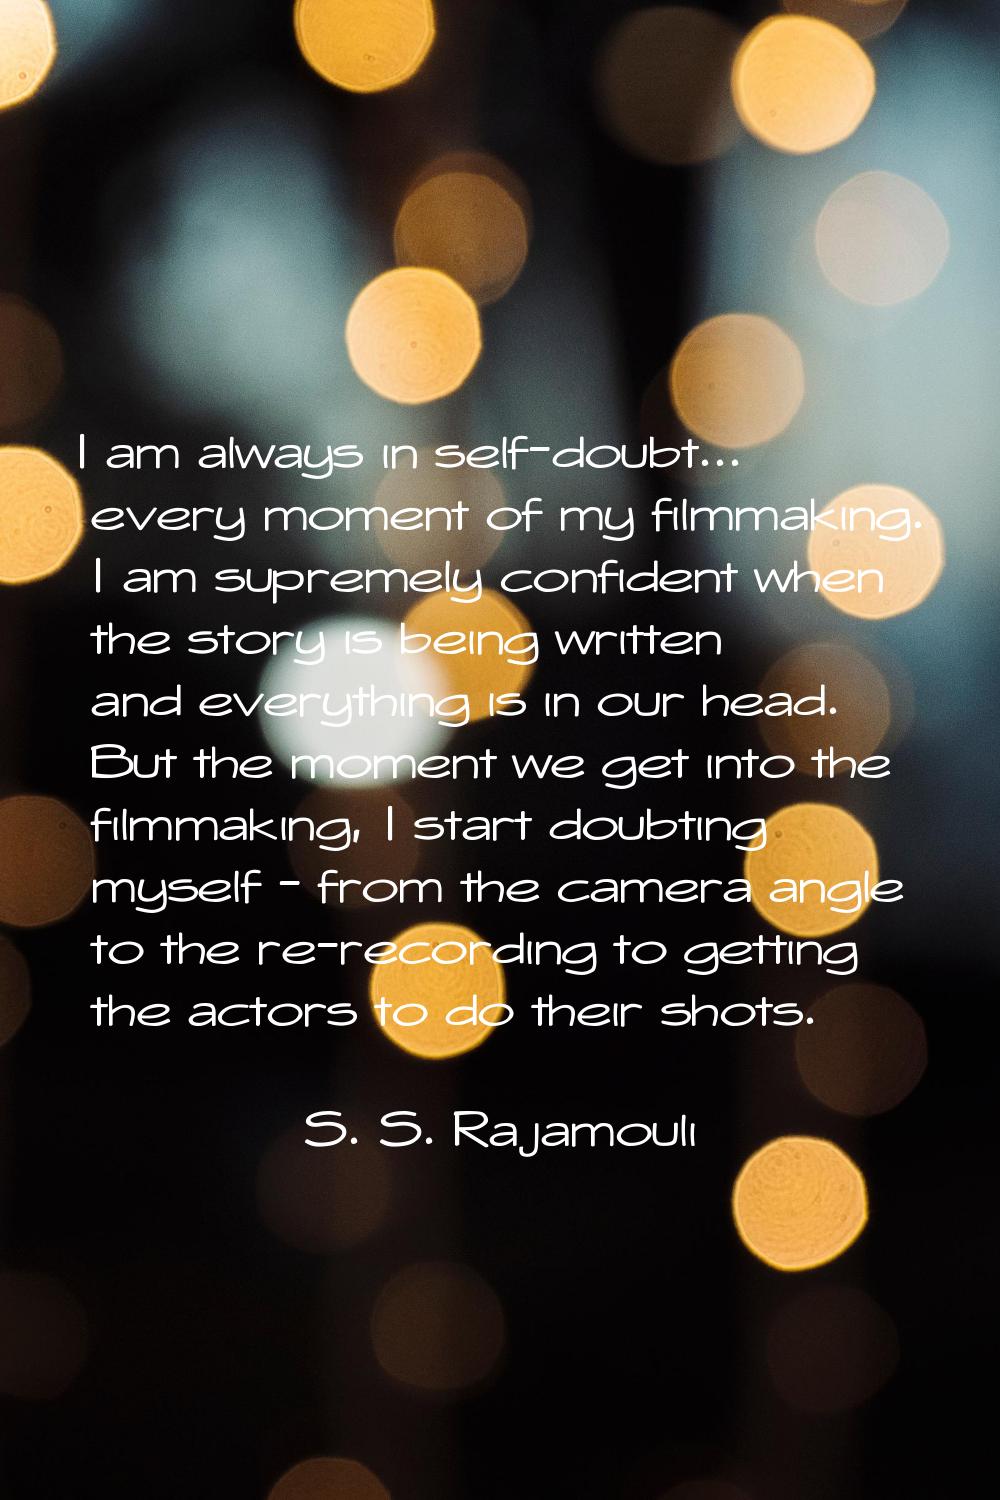 I am always in self-doubt... every moment of my filmmaking. I am supremely confident when the story